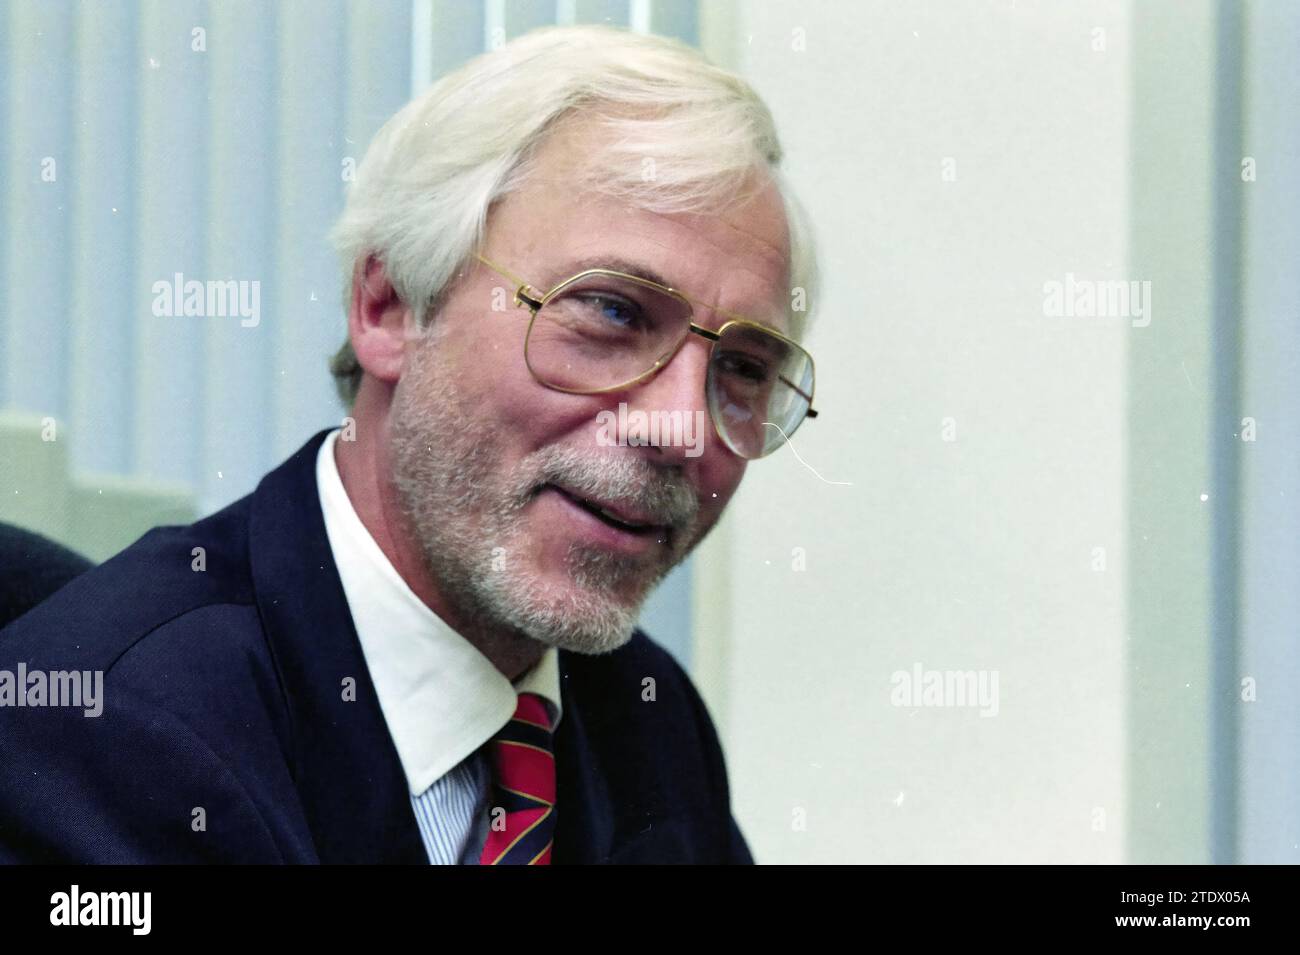 Mr. Steinert Director M.S.D. Haarlem, Haarlem, Waarderweg, The Netherlands, 22-09-1996, Whizgle News from the Past, Tailored for the Future. Explore historical narratives, Dutch The Netherlands agency image with a modern perspective, bridging the gap between yesterday's events and tomorrow's insights. A timeless journey shaping the stories that shape our future Stock Photo